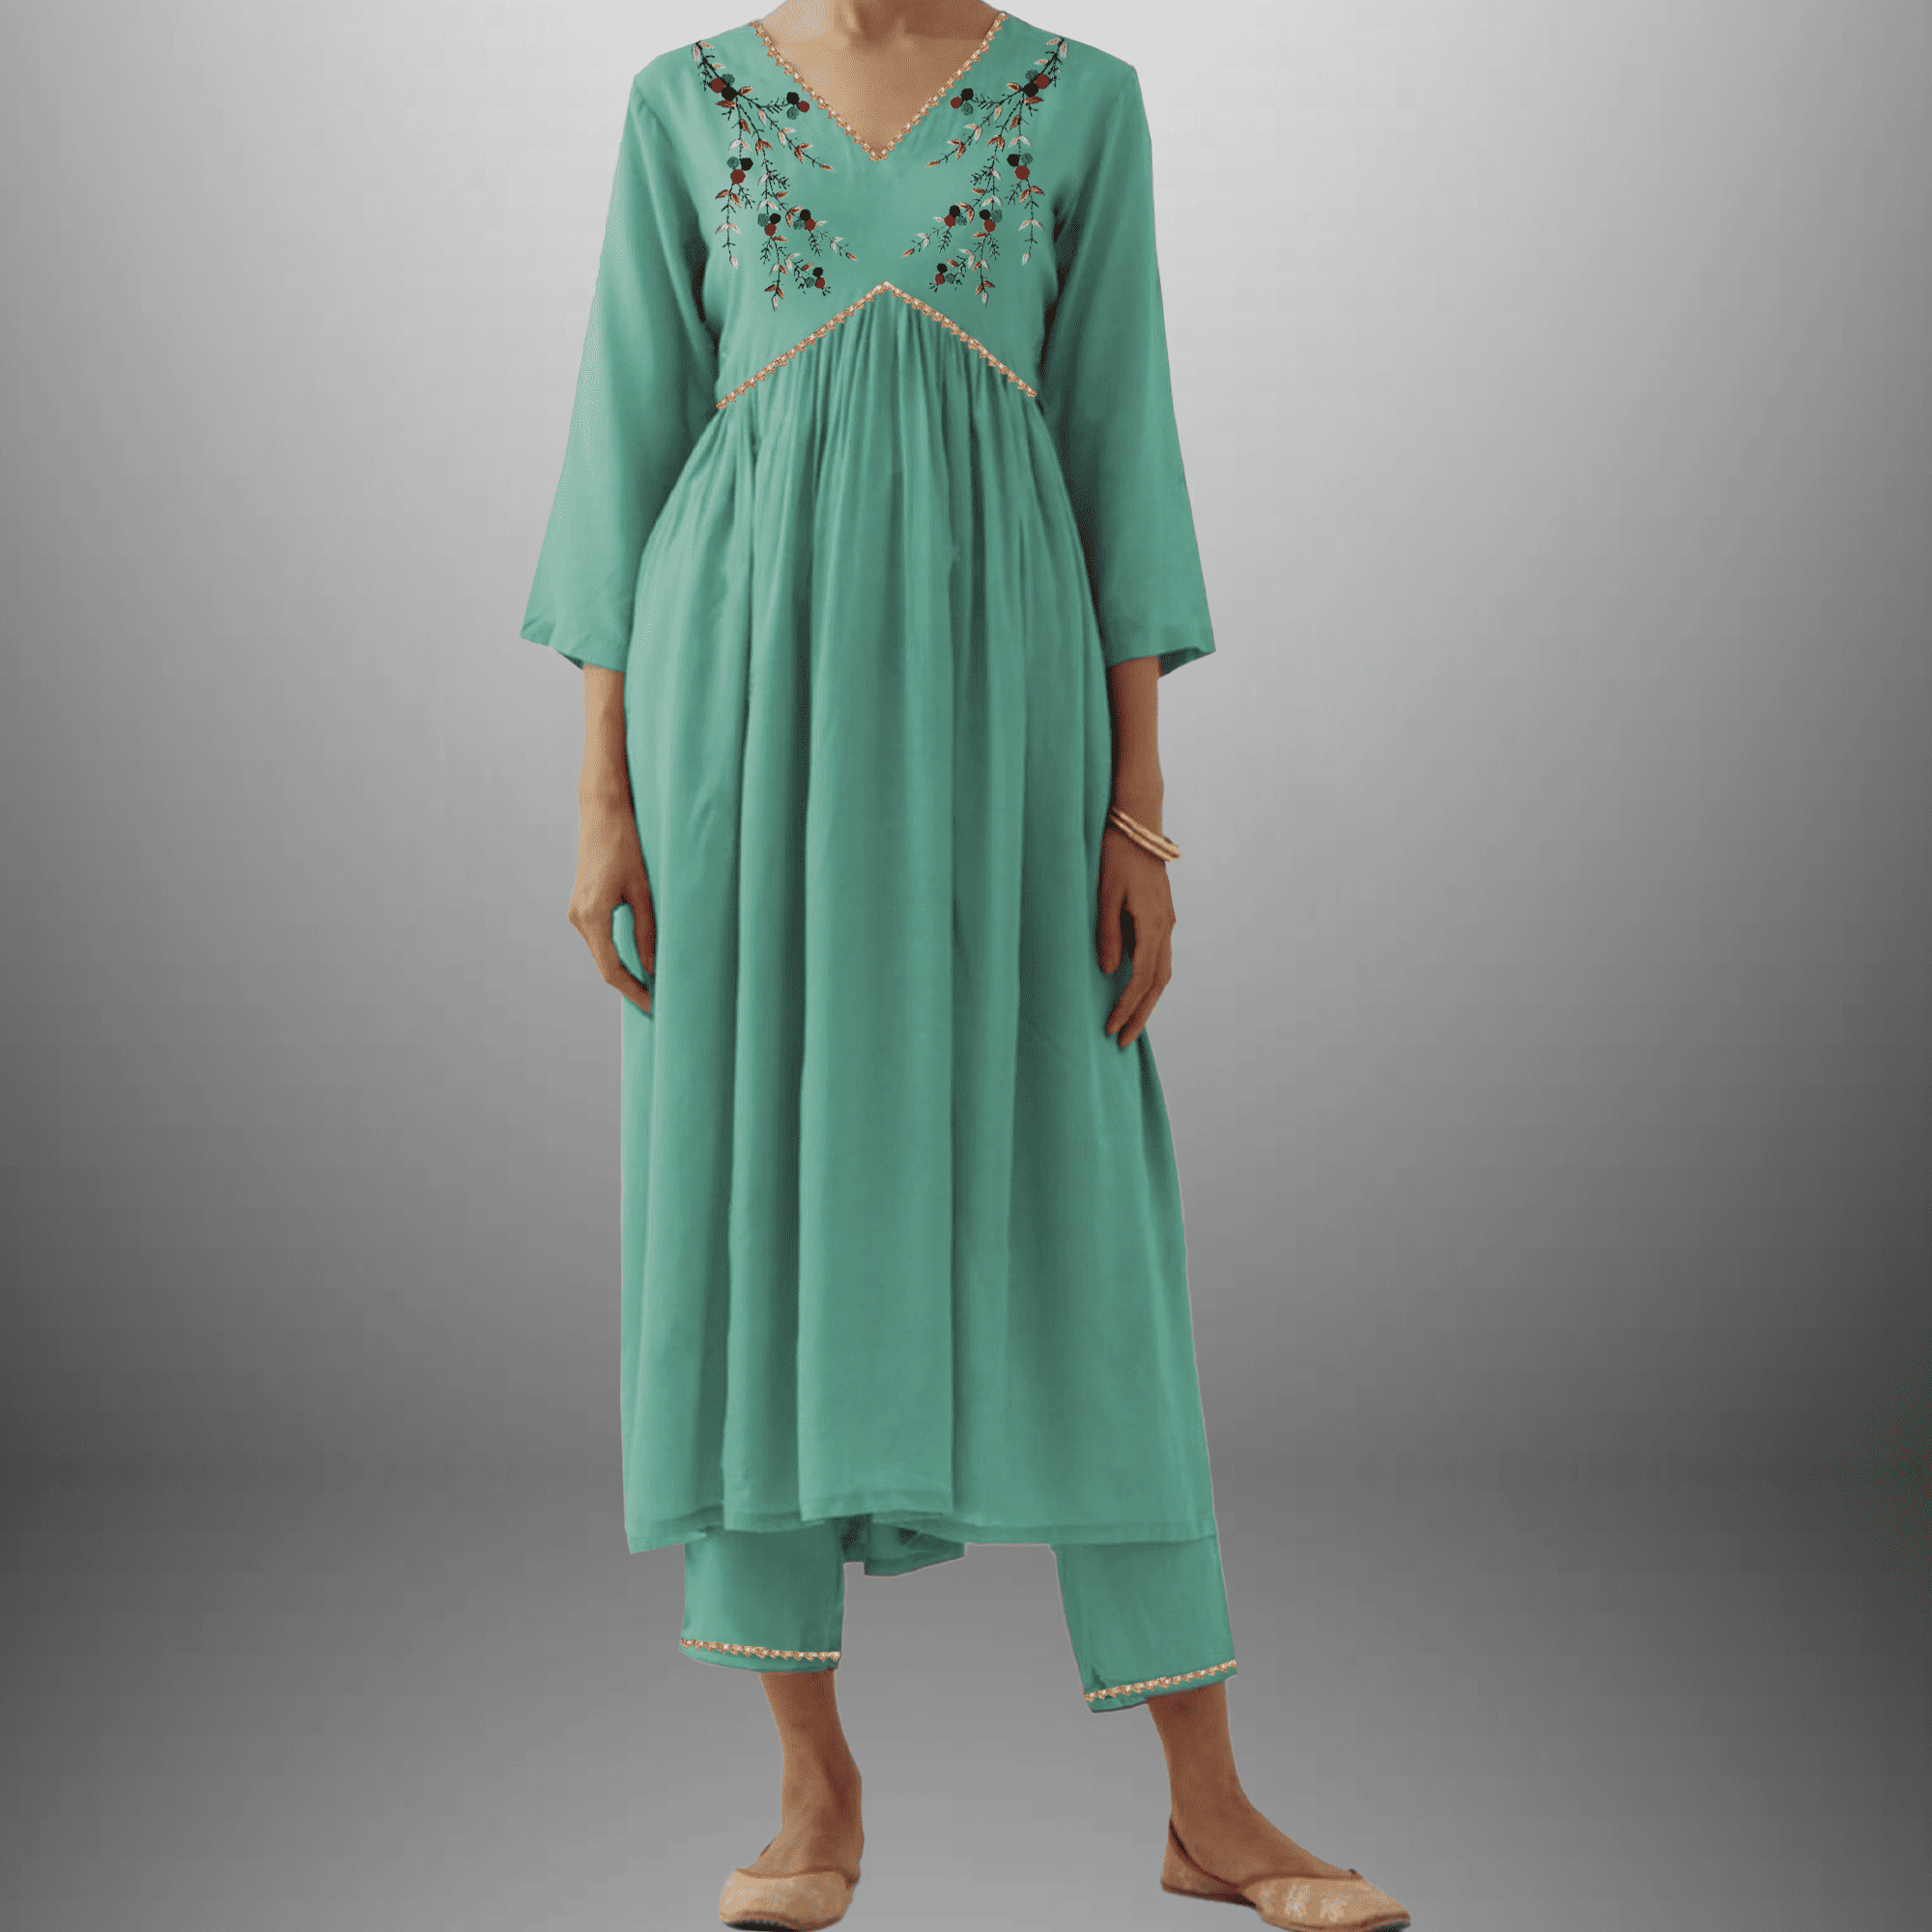 Women's  Mint Green Kurti set with Golden lace border and Embroidery on front-RWKS047